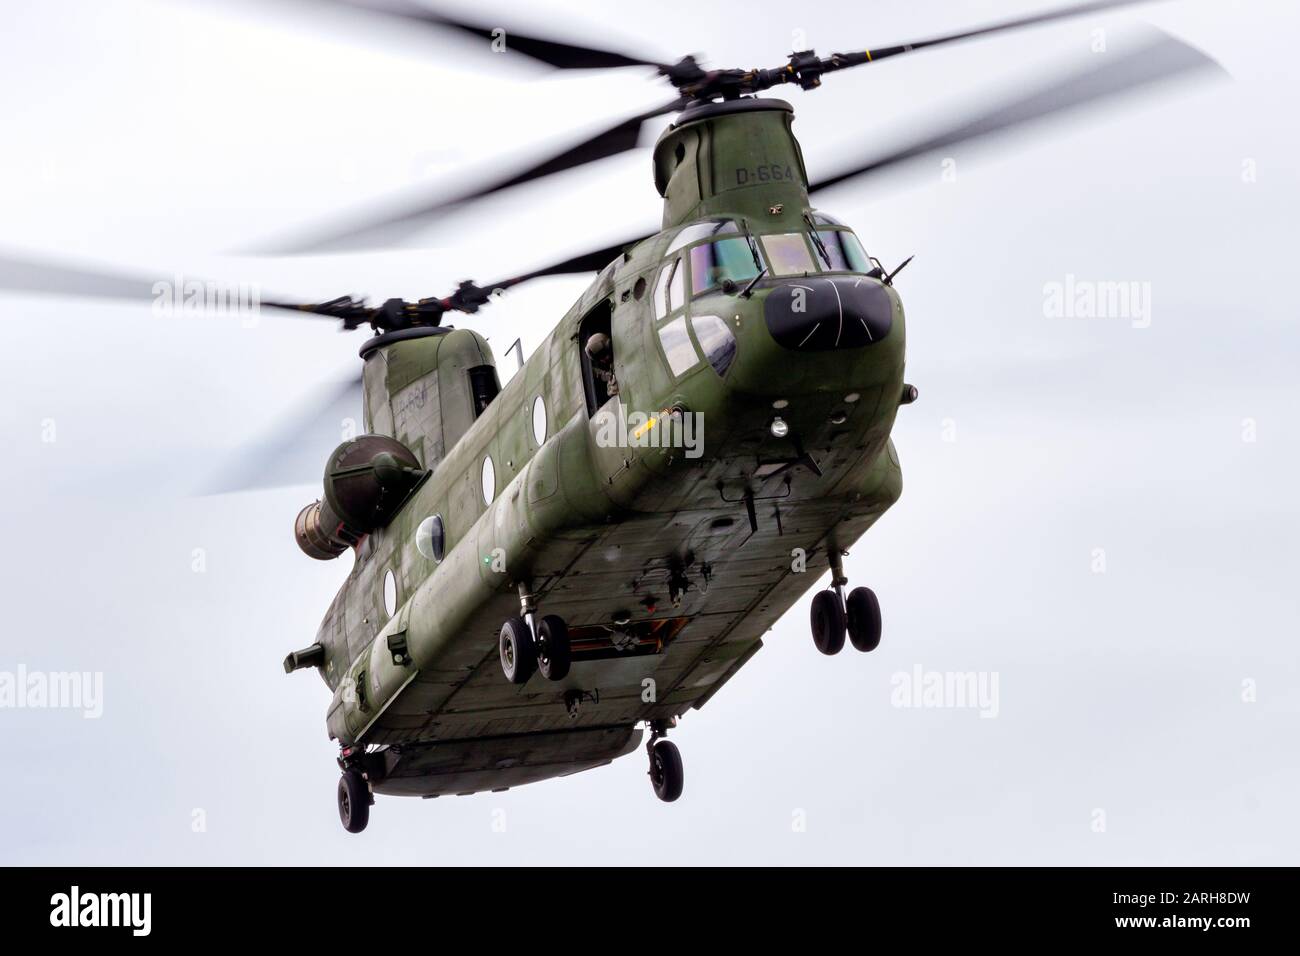 DEN HELDER, THE NETHERLANDS - JUNE 23: Royal Netherlands Air Force Boeing CH-47D Chinook transport helicopter about to land. Stock Photo